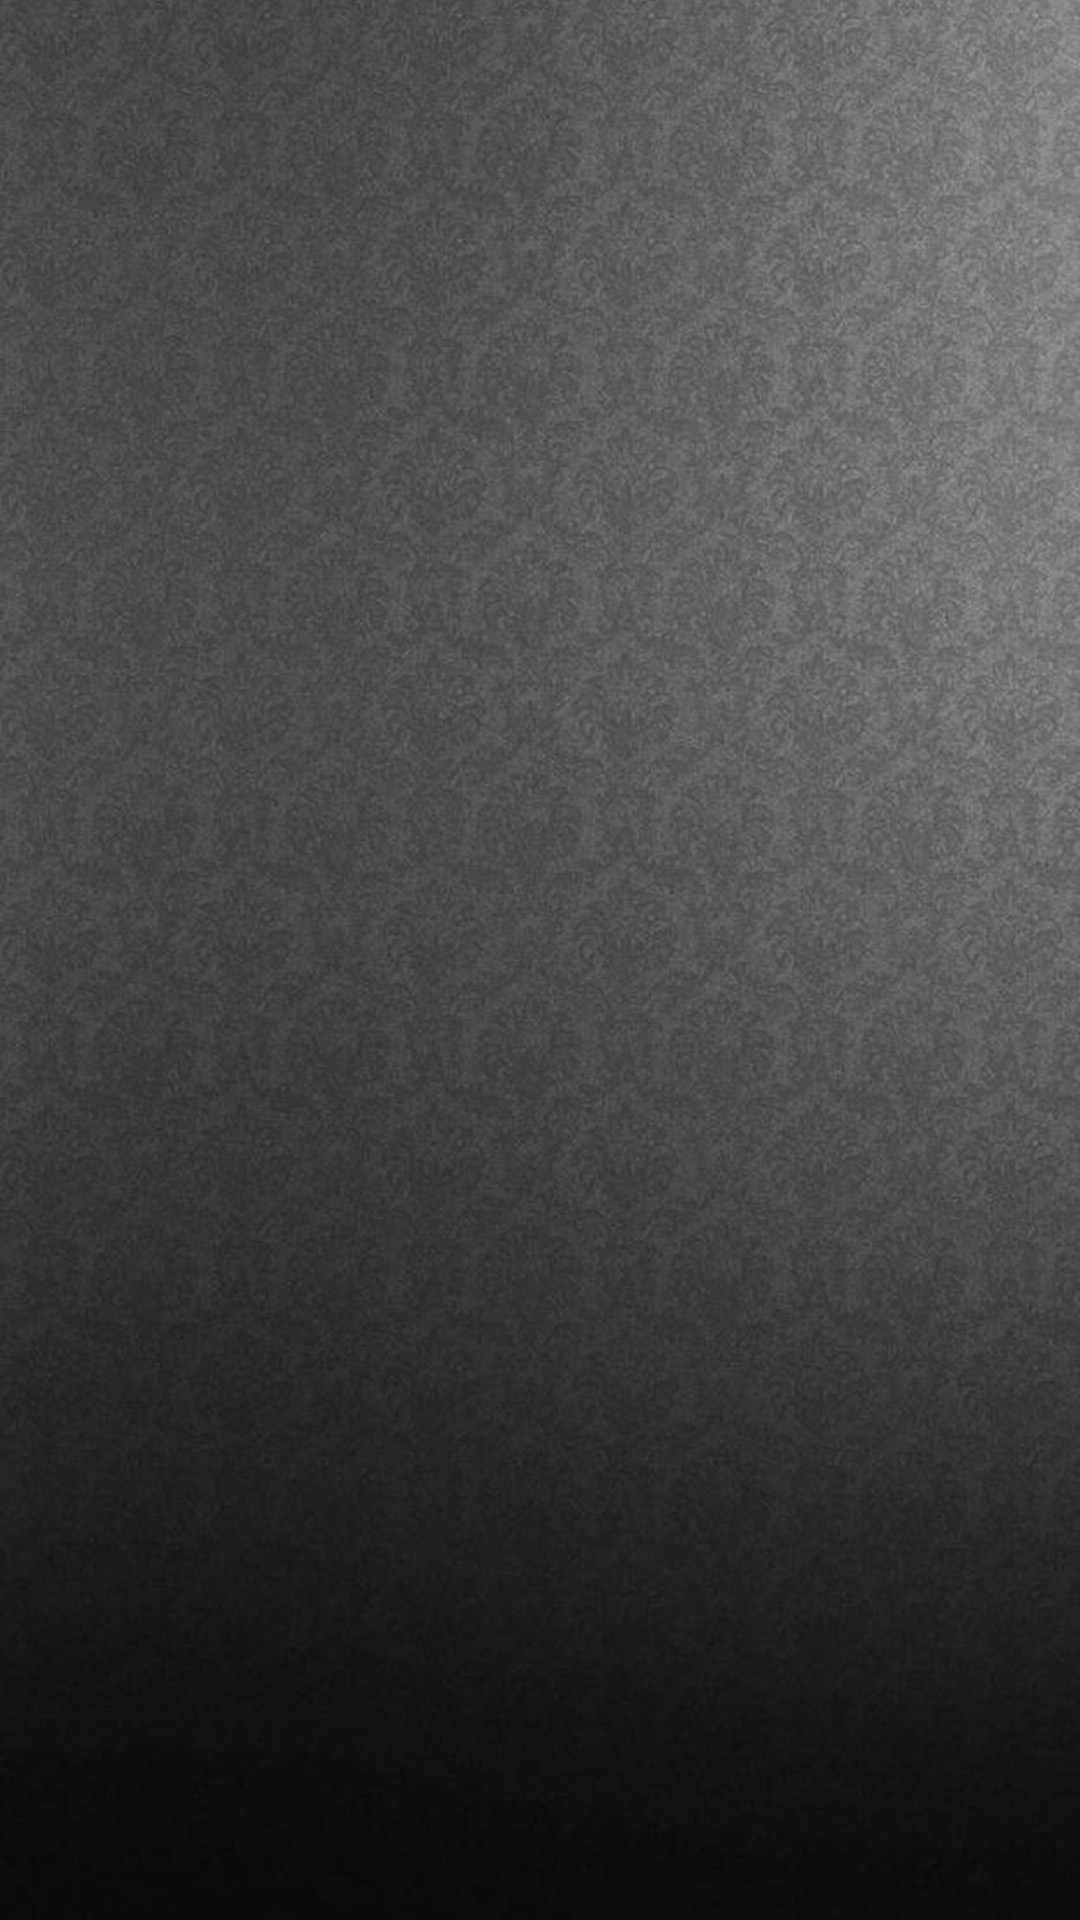 Textures Htc One M8 Wallpaper